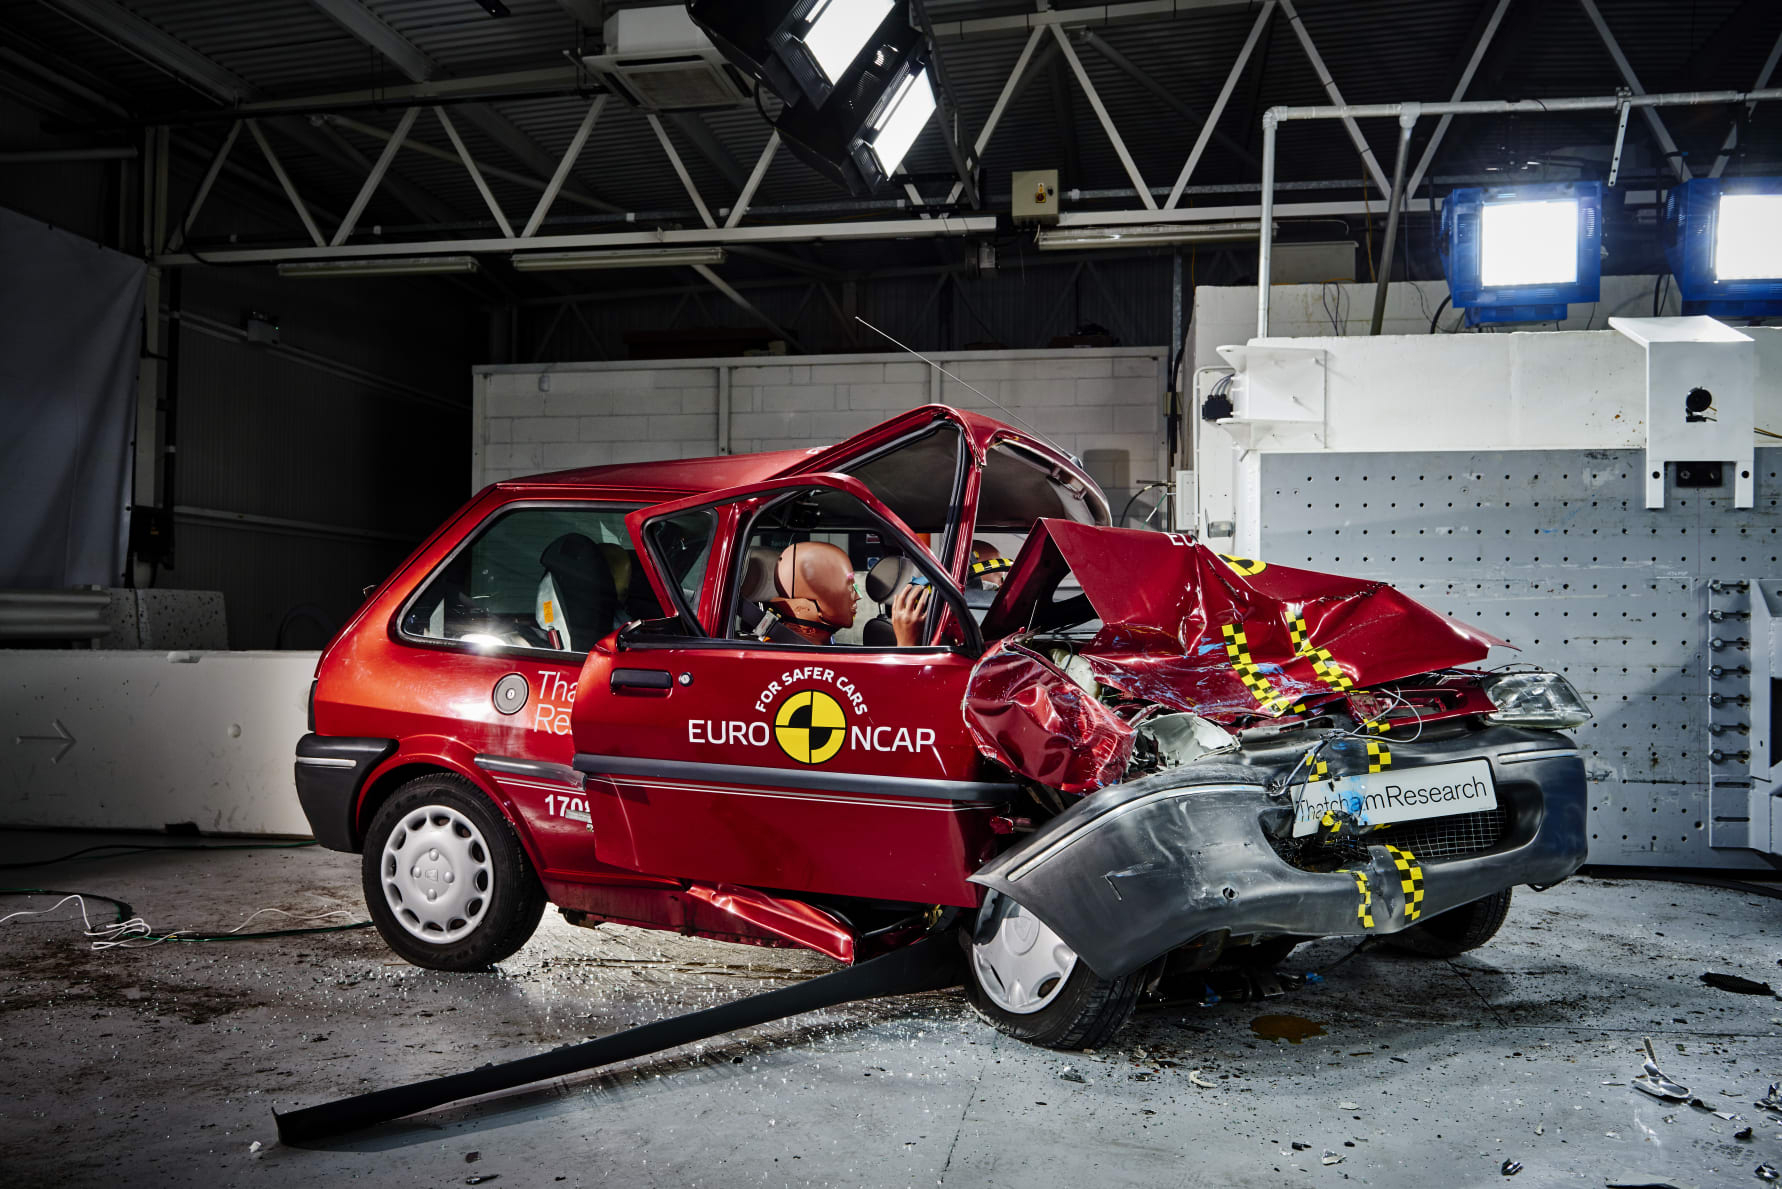 Euro NCAP 20th – the 1997 Rover 100 shortly after a 40mph frontal offset crash test in the Thatcham Research Crash Lab